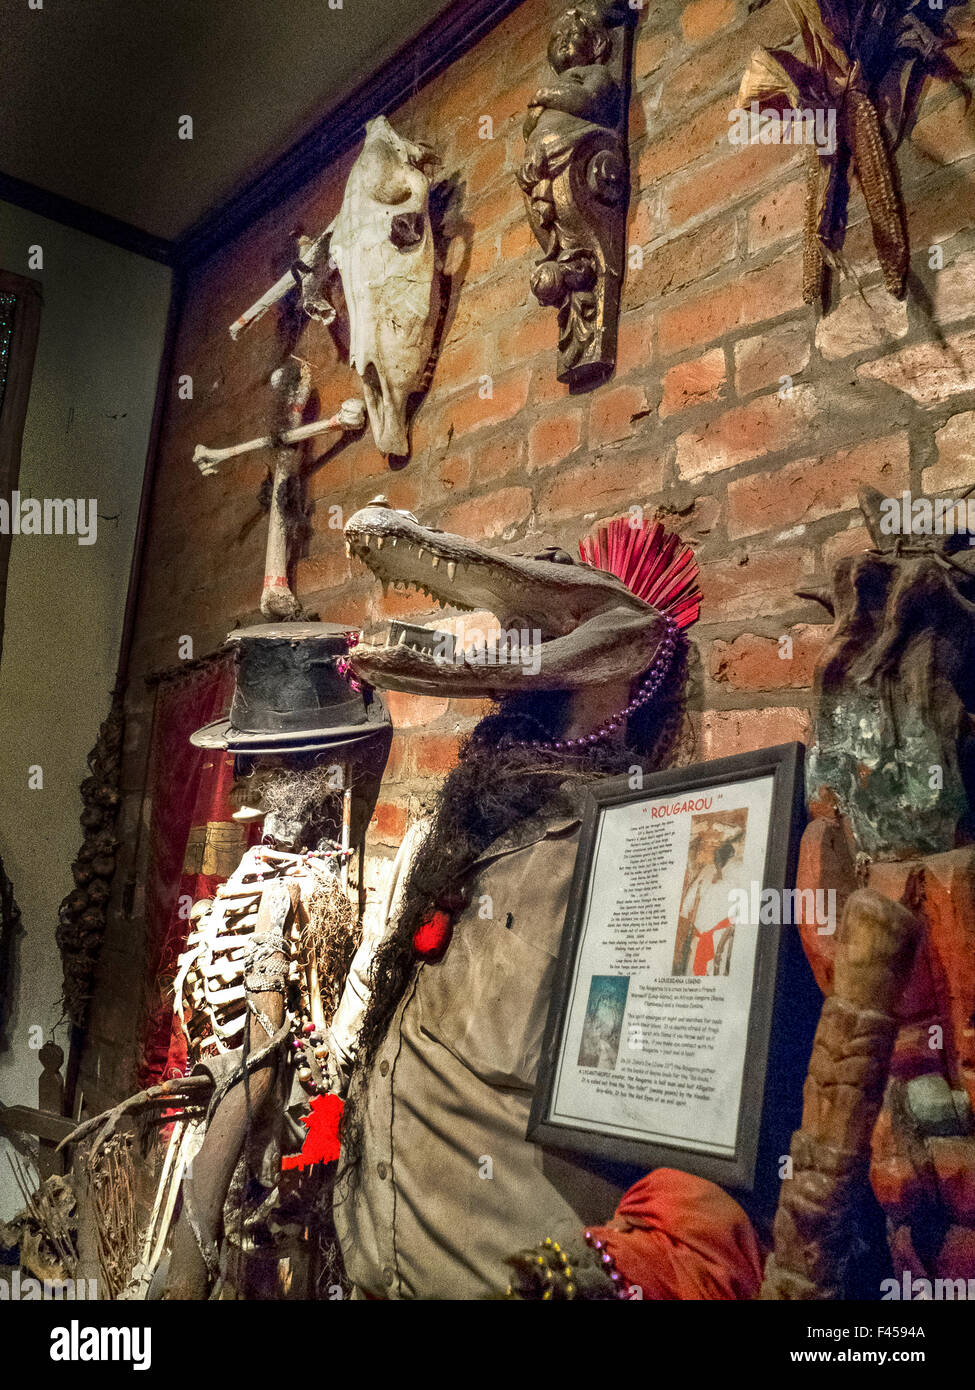 An alligator headed re-creation of the rougarou is exhinited at the Voodoo Museum in New Orleans. The rougarou is a legendary creature in French communities linked to European notions of the werewolf. Stock Photo